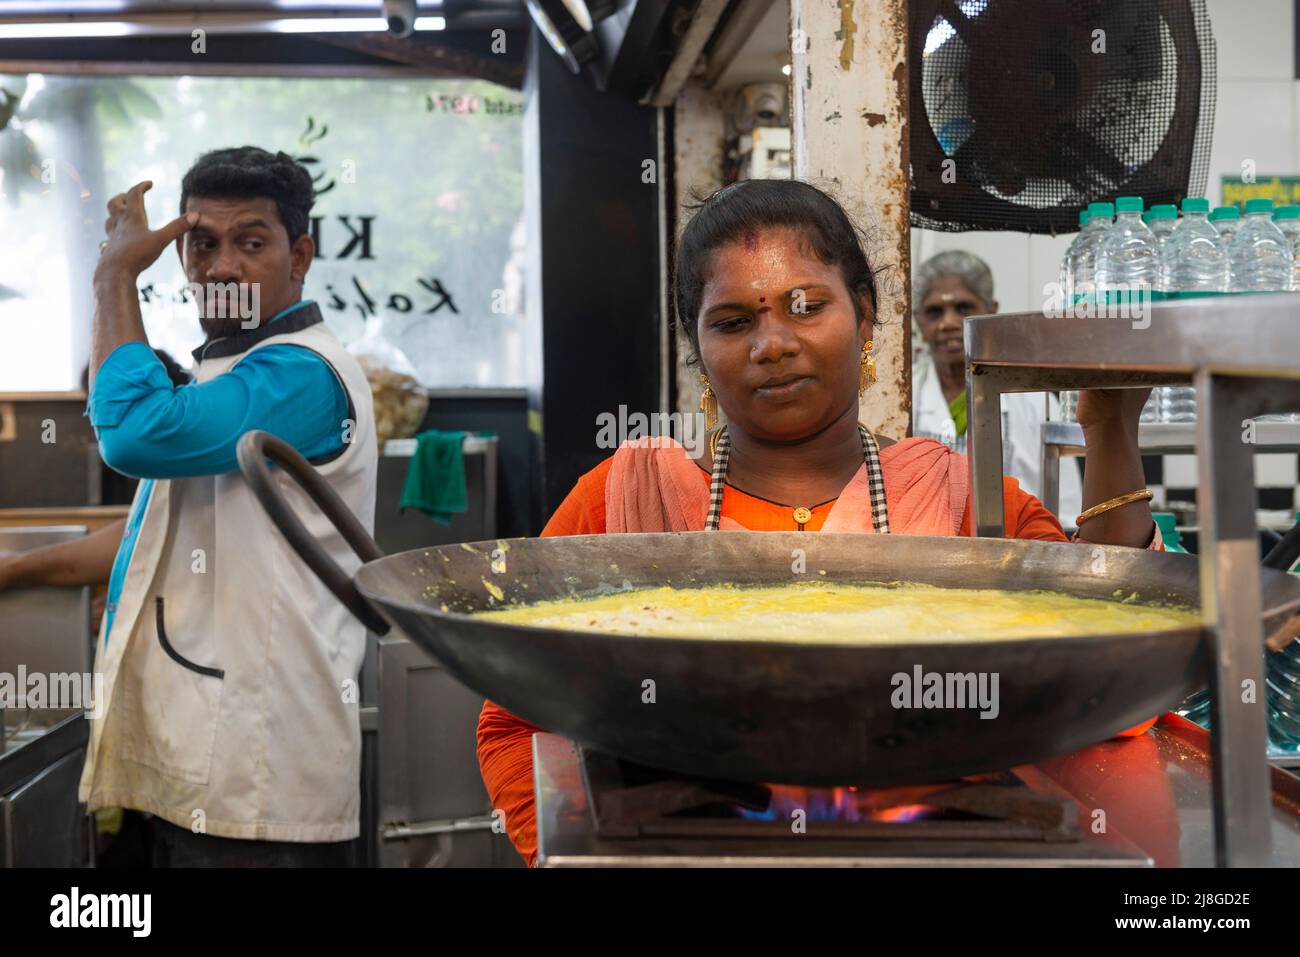 Pondicherry, India - 6th May 2022: Preparing a Badam Milk at KBS Kofi Bar in Law de Lauriston Street. Popular Indian drink made with milk and almonds Stock Photo